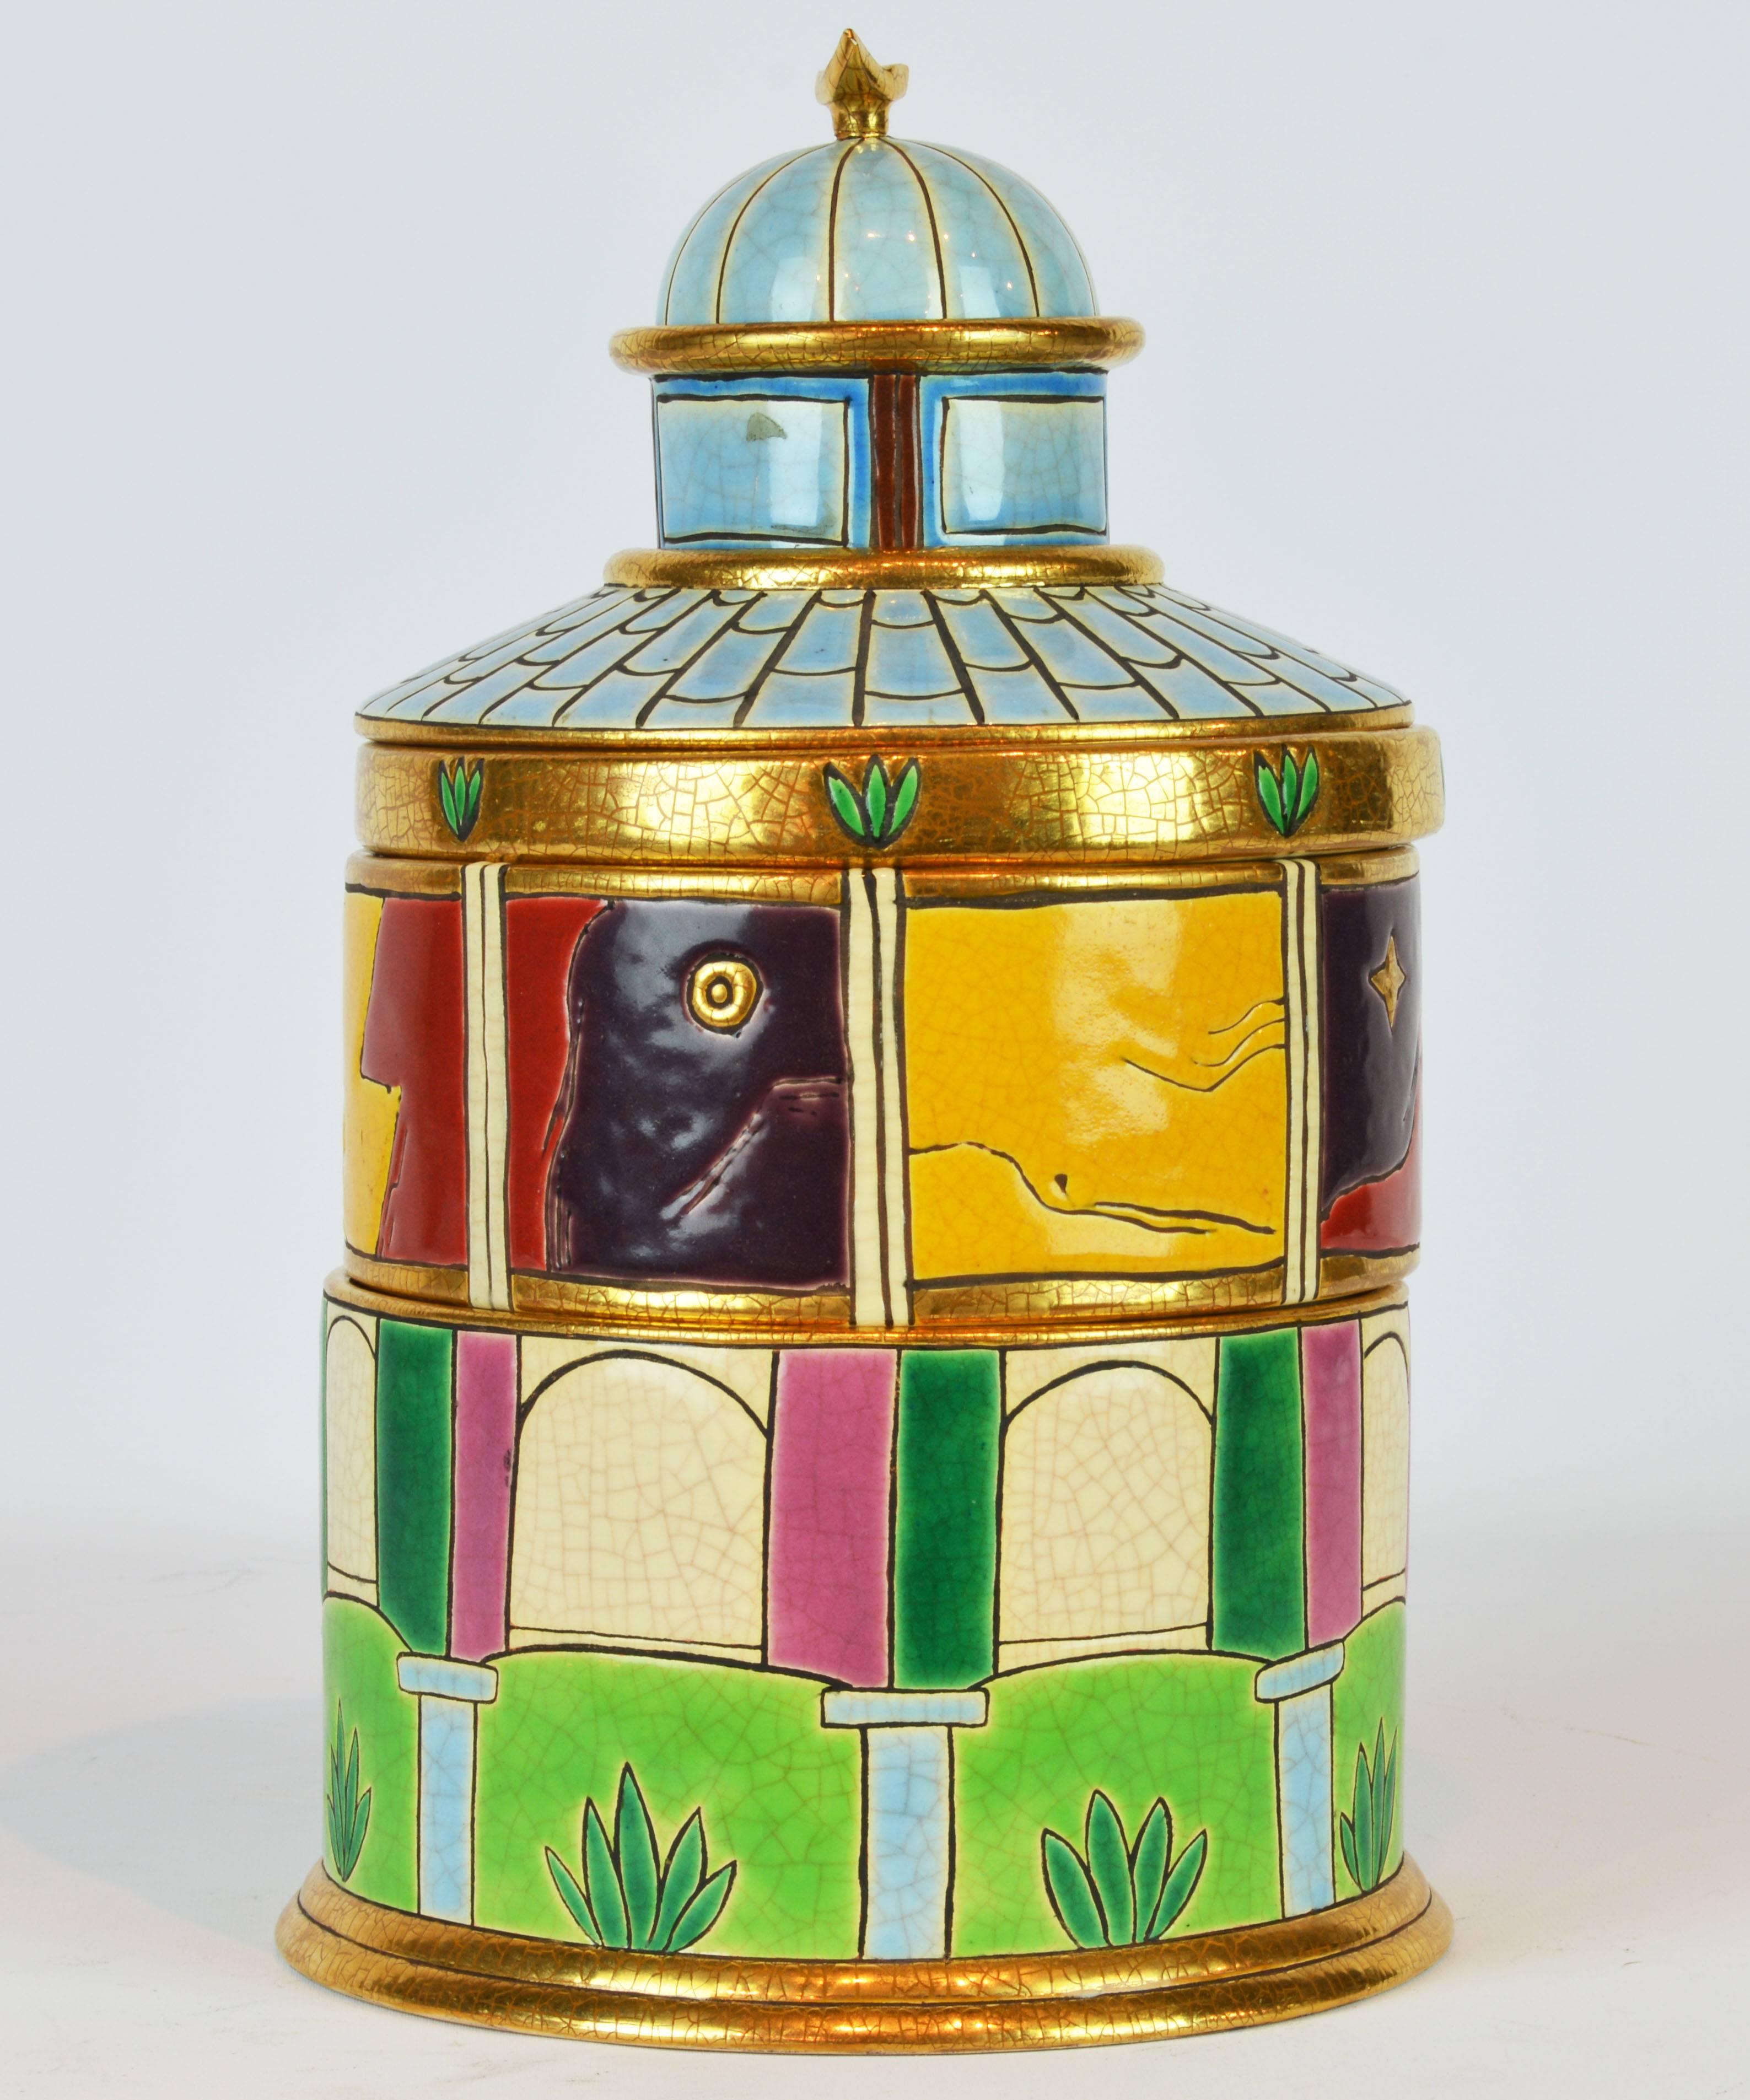 Standing 13 inches tall this is a rare and wonderful example of Pierre Casenove's designs for legendary Emaux de Longwy. View the photos to see how the tower disassembles into six single items. The faience is decorated in bright colored enamels and